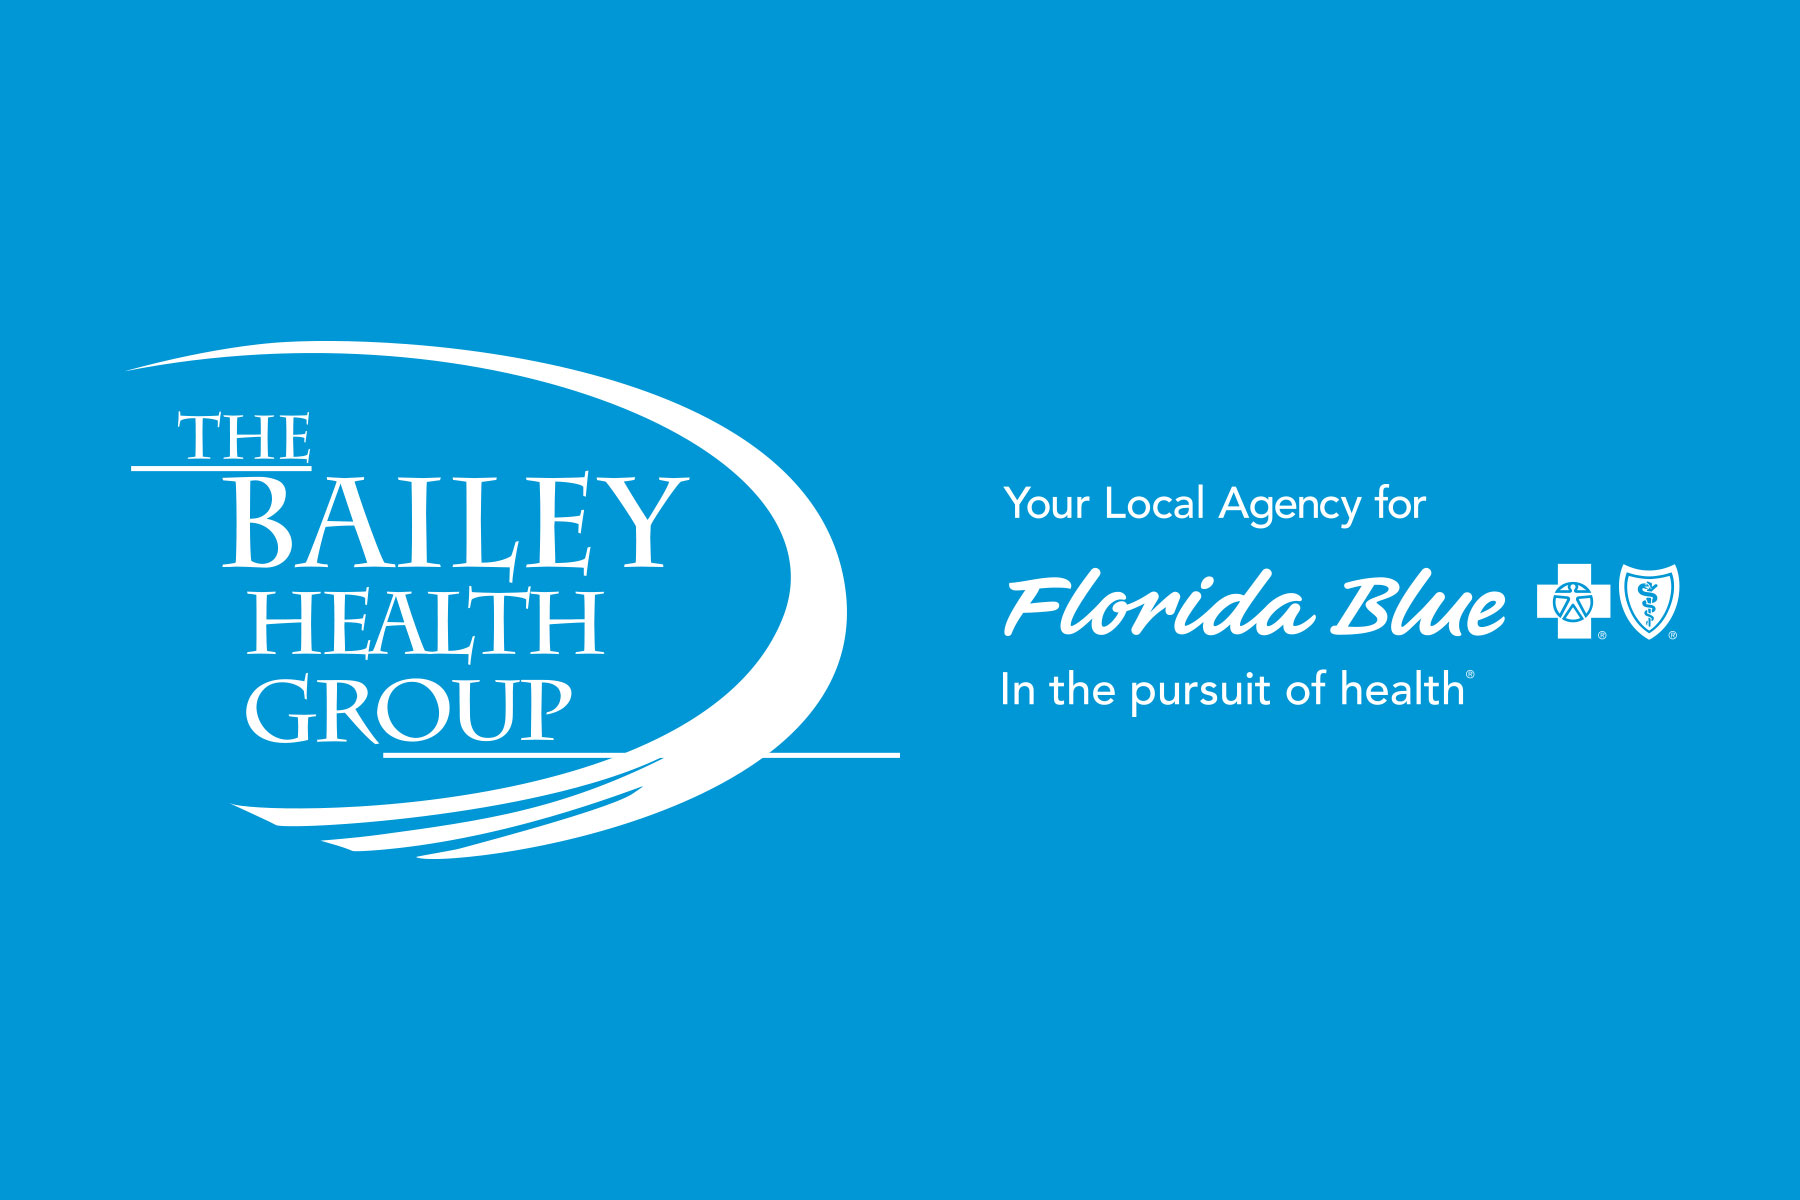 The Bailey Health Group and Florida Blue